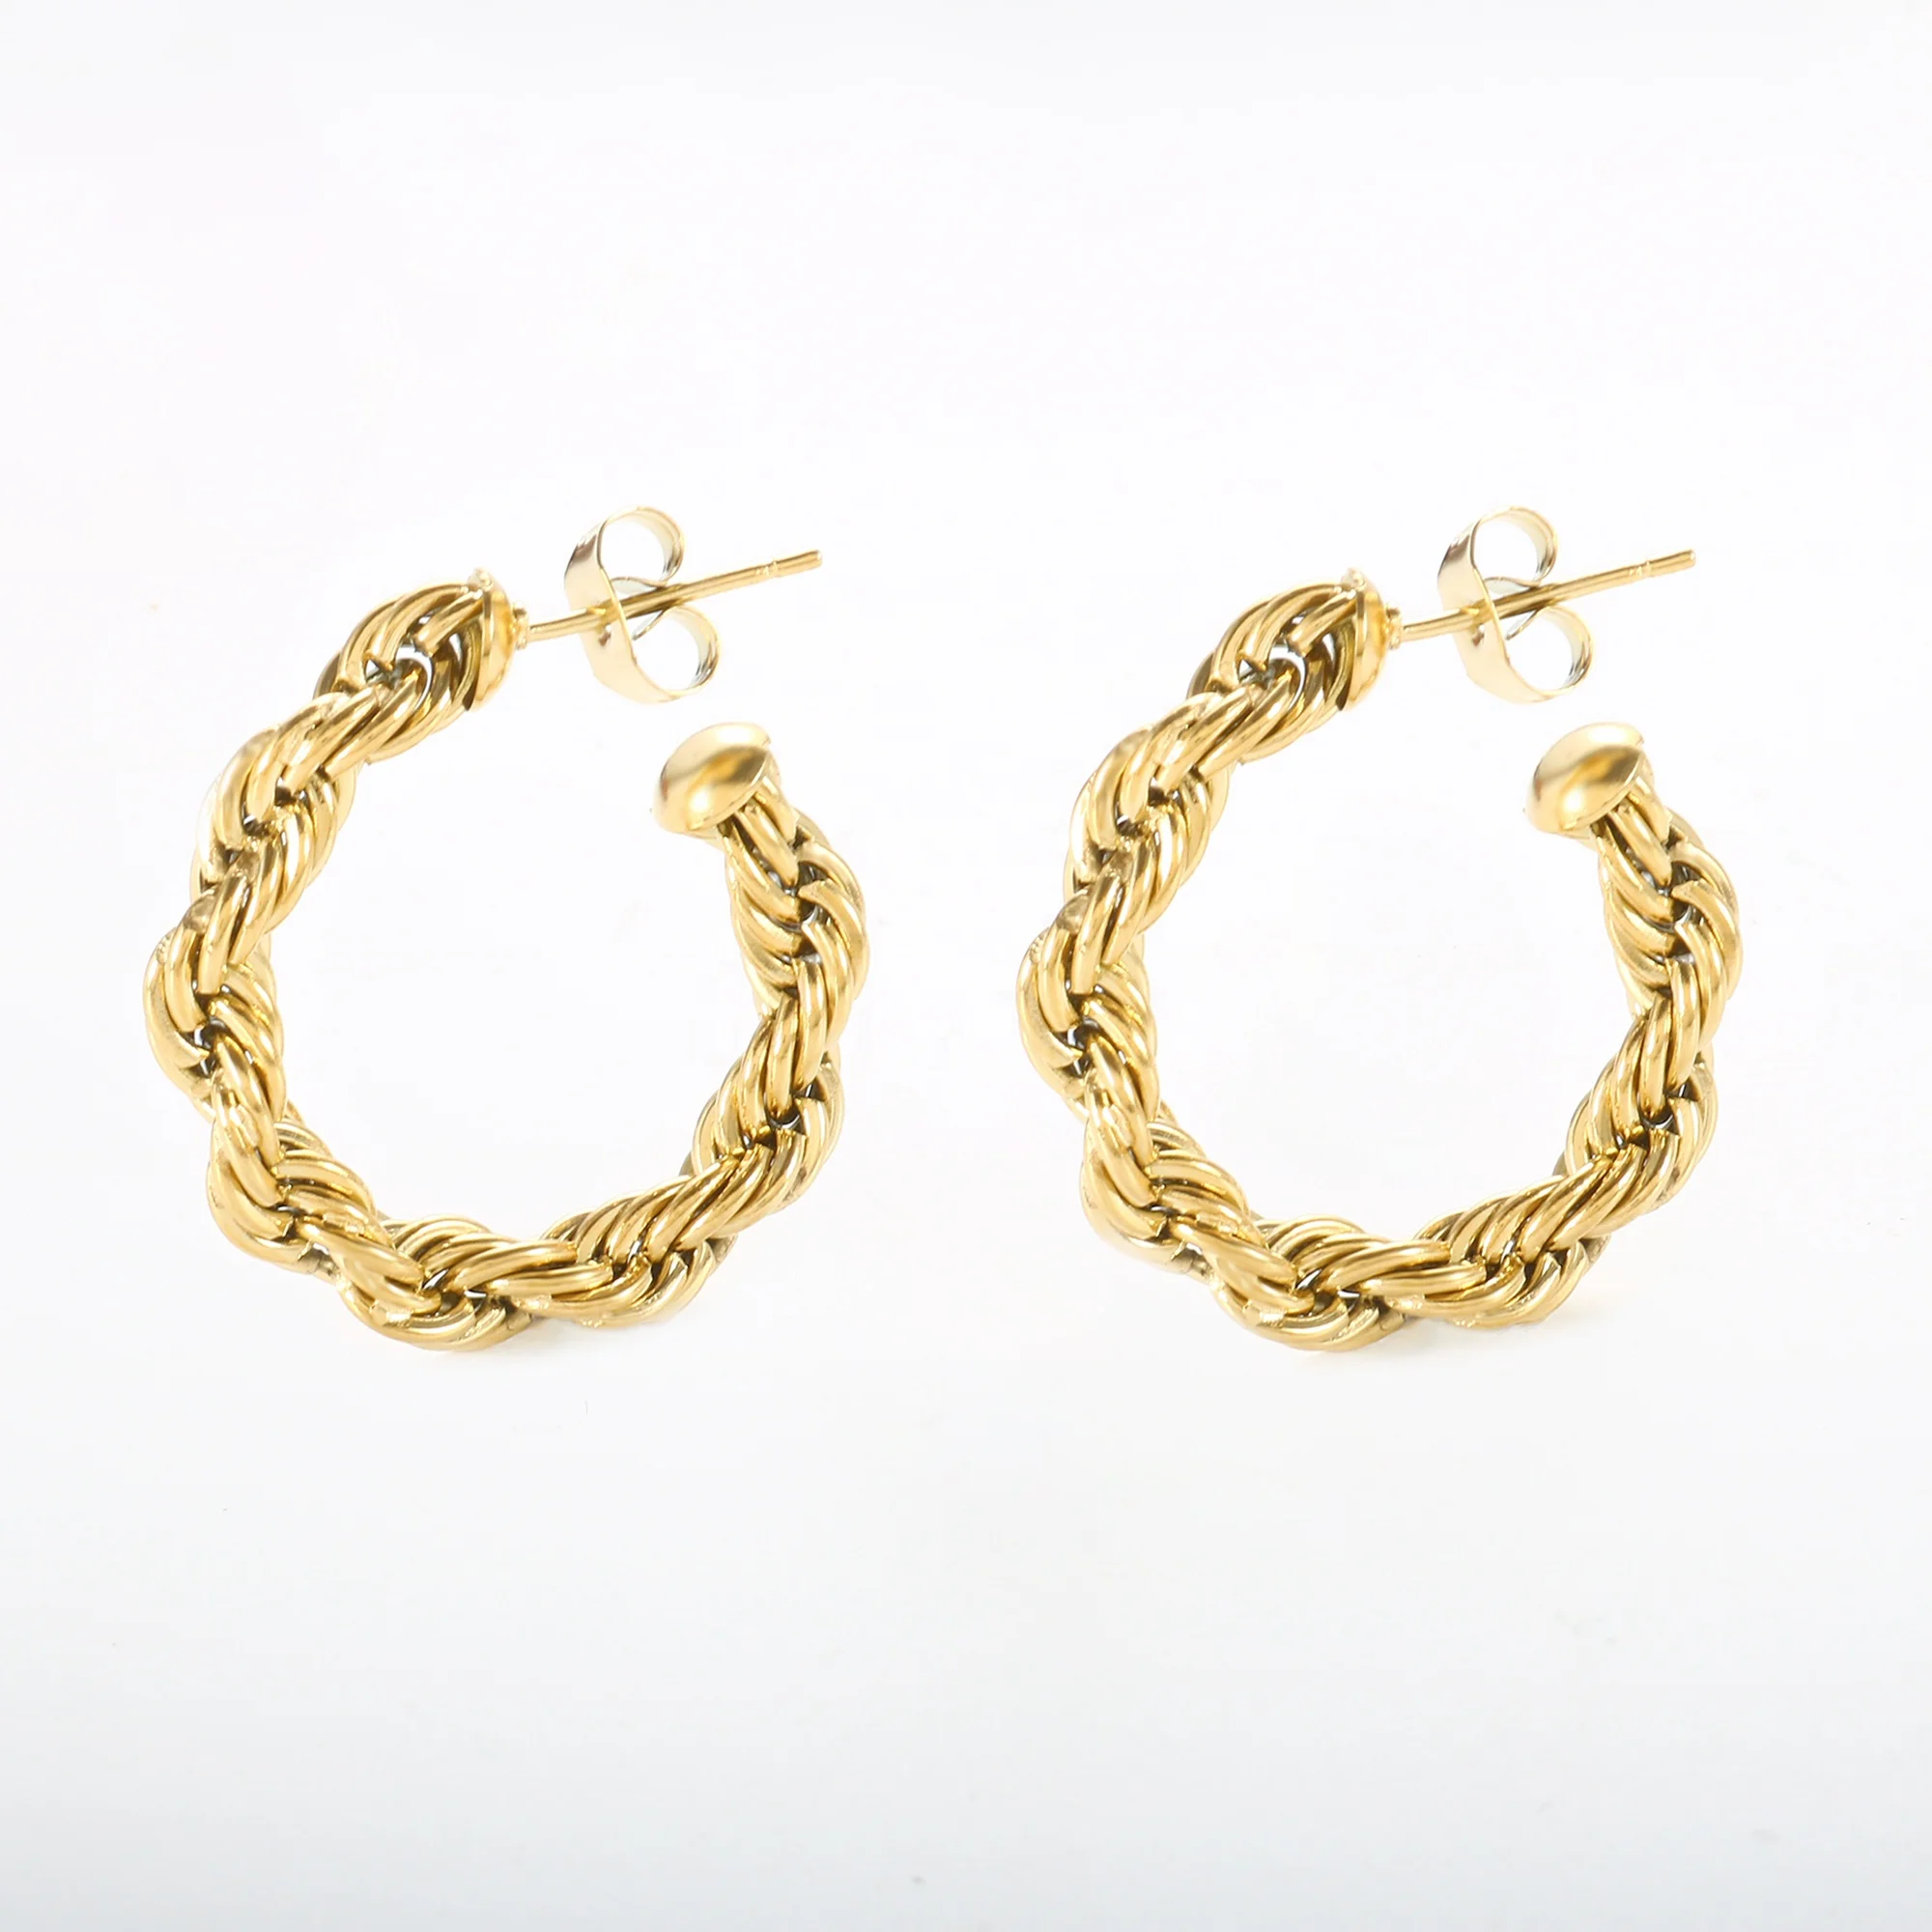 

Fashion Accessories Jewelry Gold Twisted Hoop Earrings 18k Gold Plated Rope Chain Earrings, Gold/silver/rose gold/black